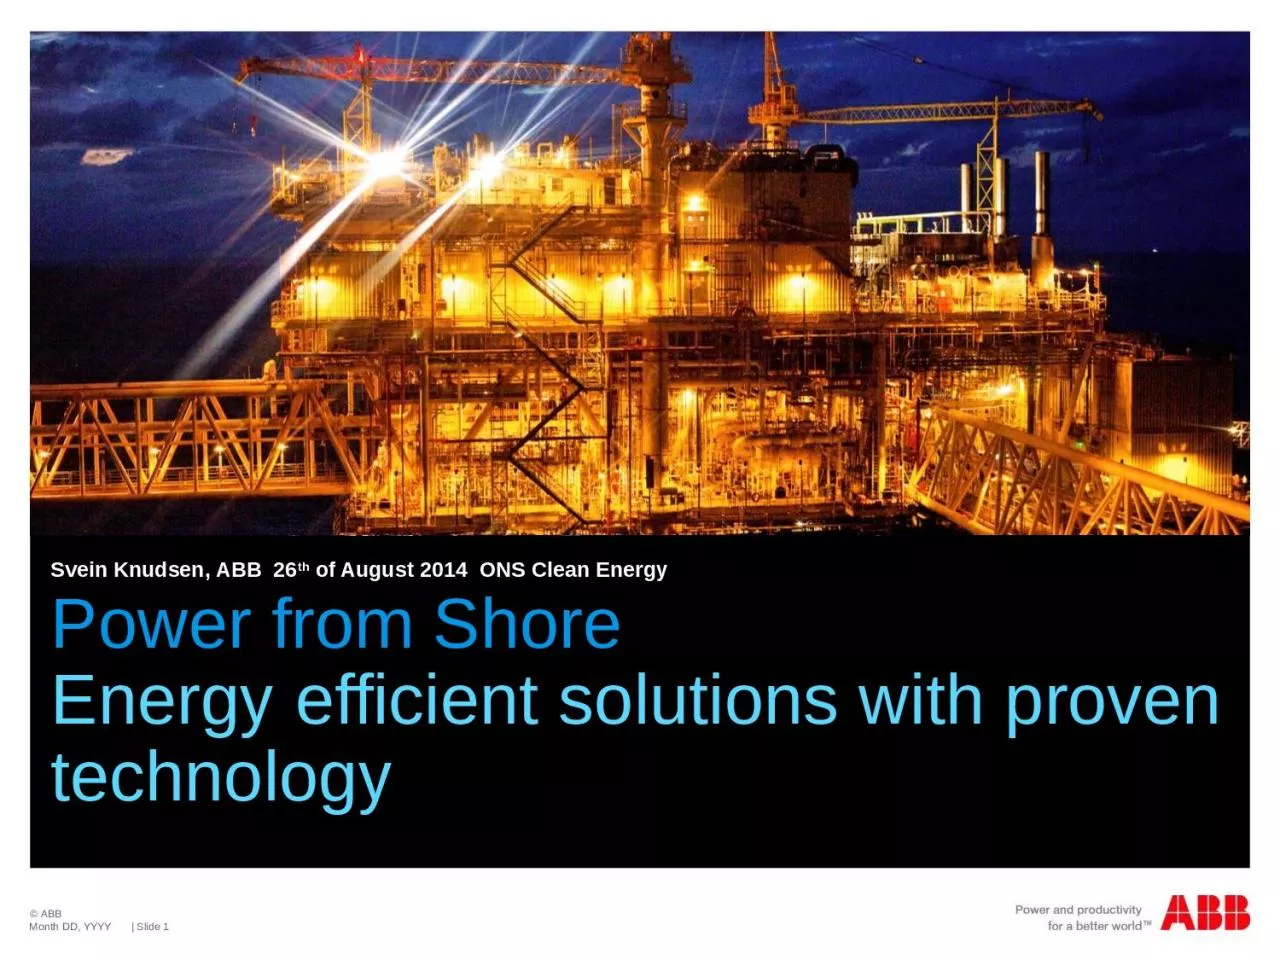 Power from Shore Energy efficient solutions with proven technology